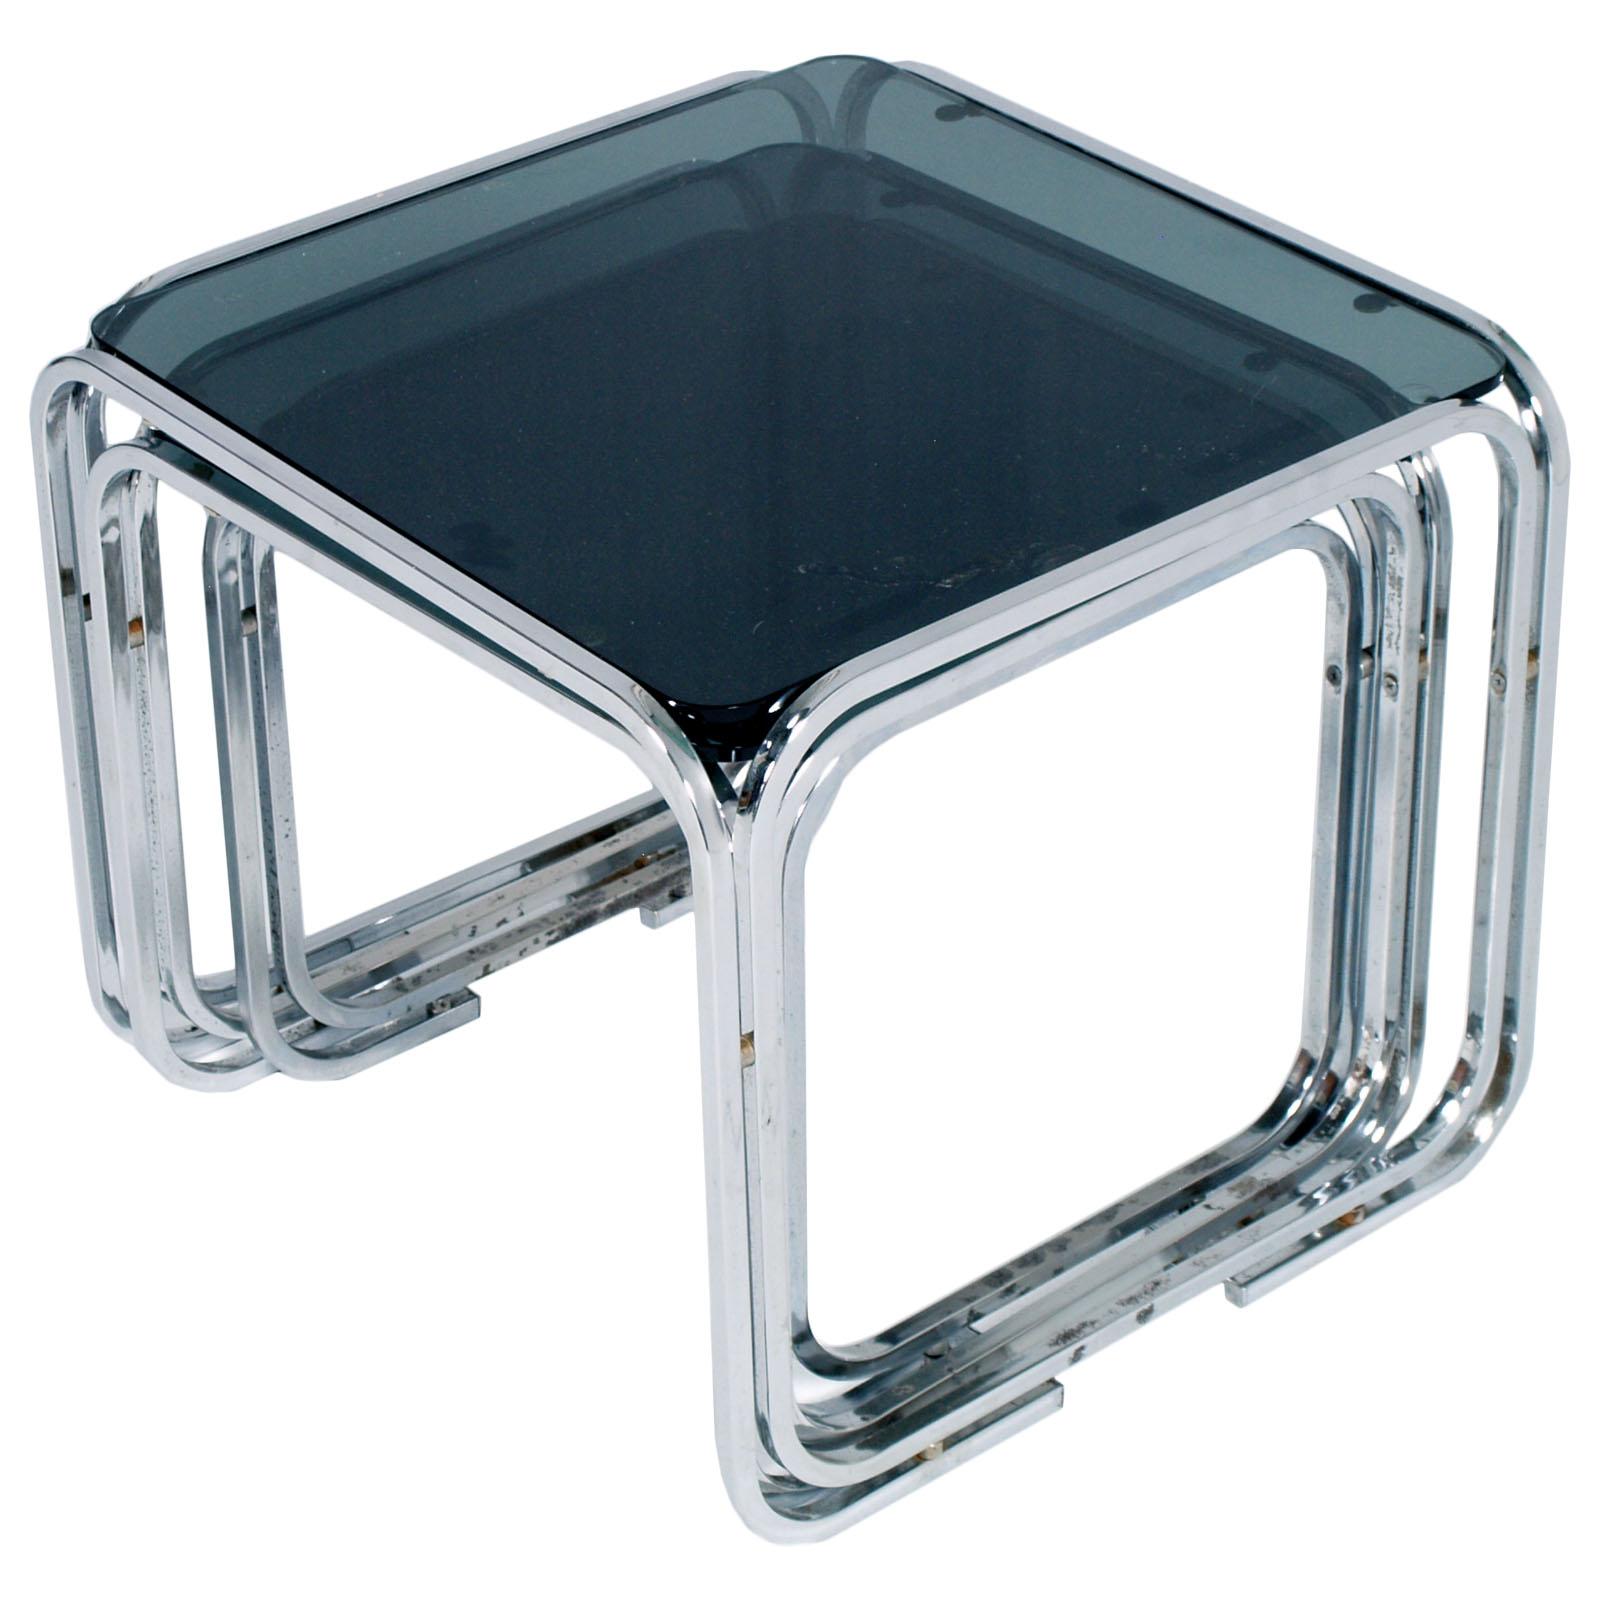 Italian midcentury glass fumè and chromed tubular steel nest coffee tables, Marcel Breuer style in good conditions.

Measures cm: H 42, W 48, D 48.